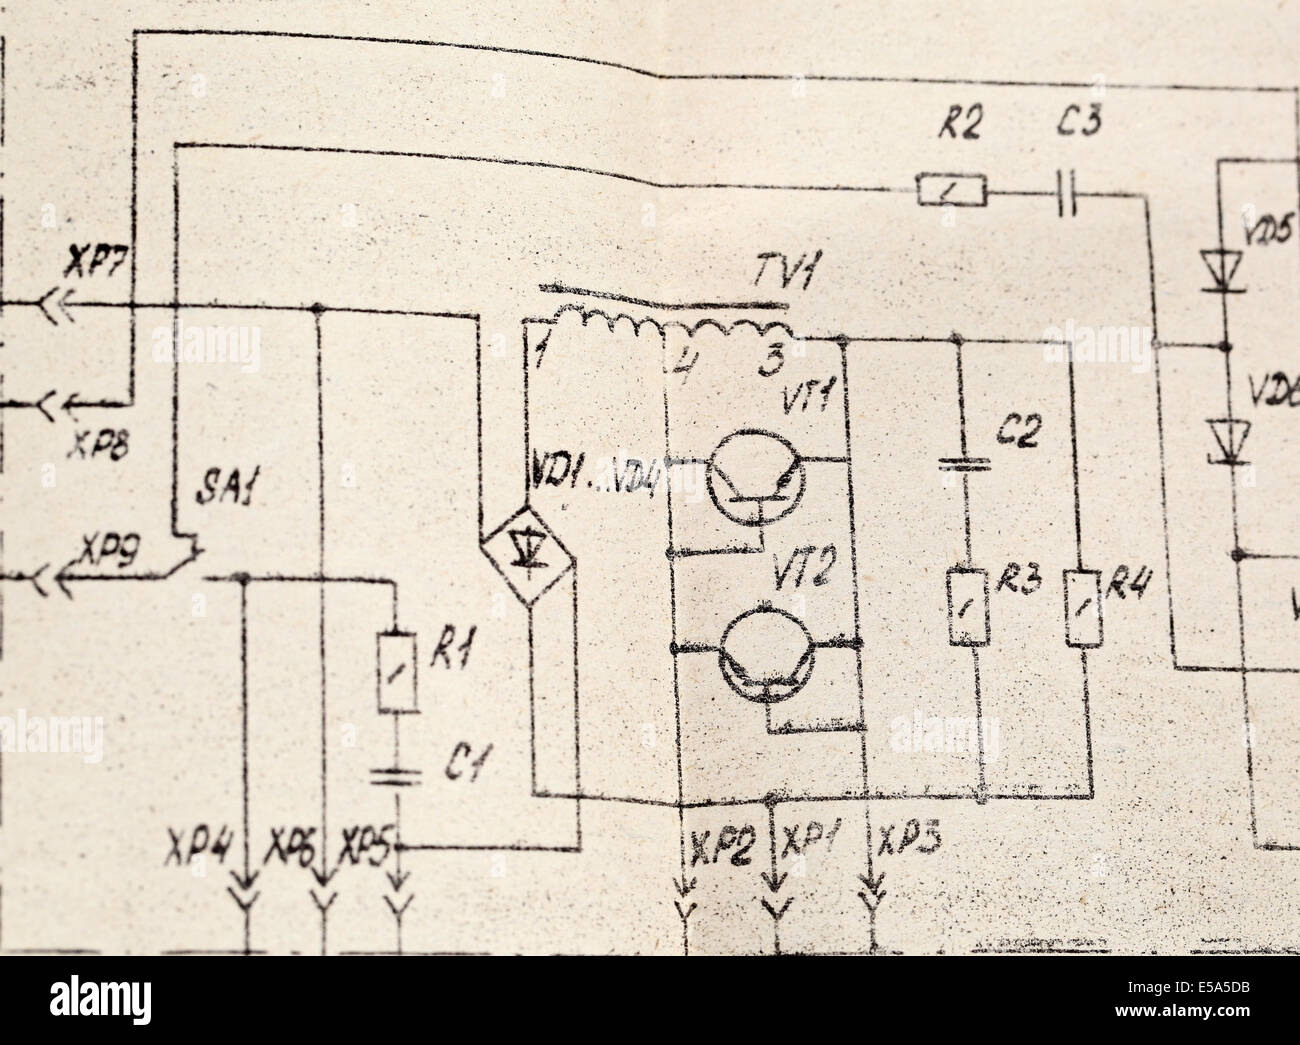 A schematic drawing. Good background Stock Photo